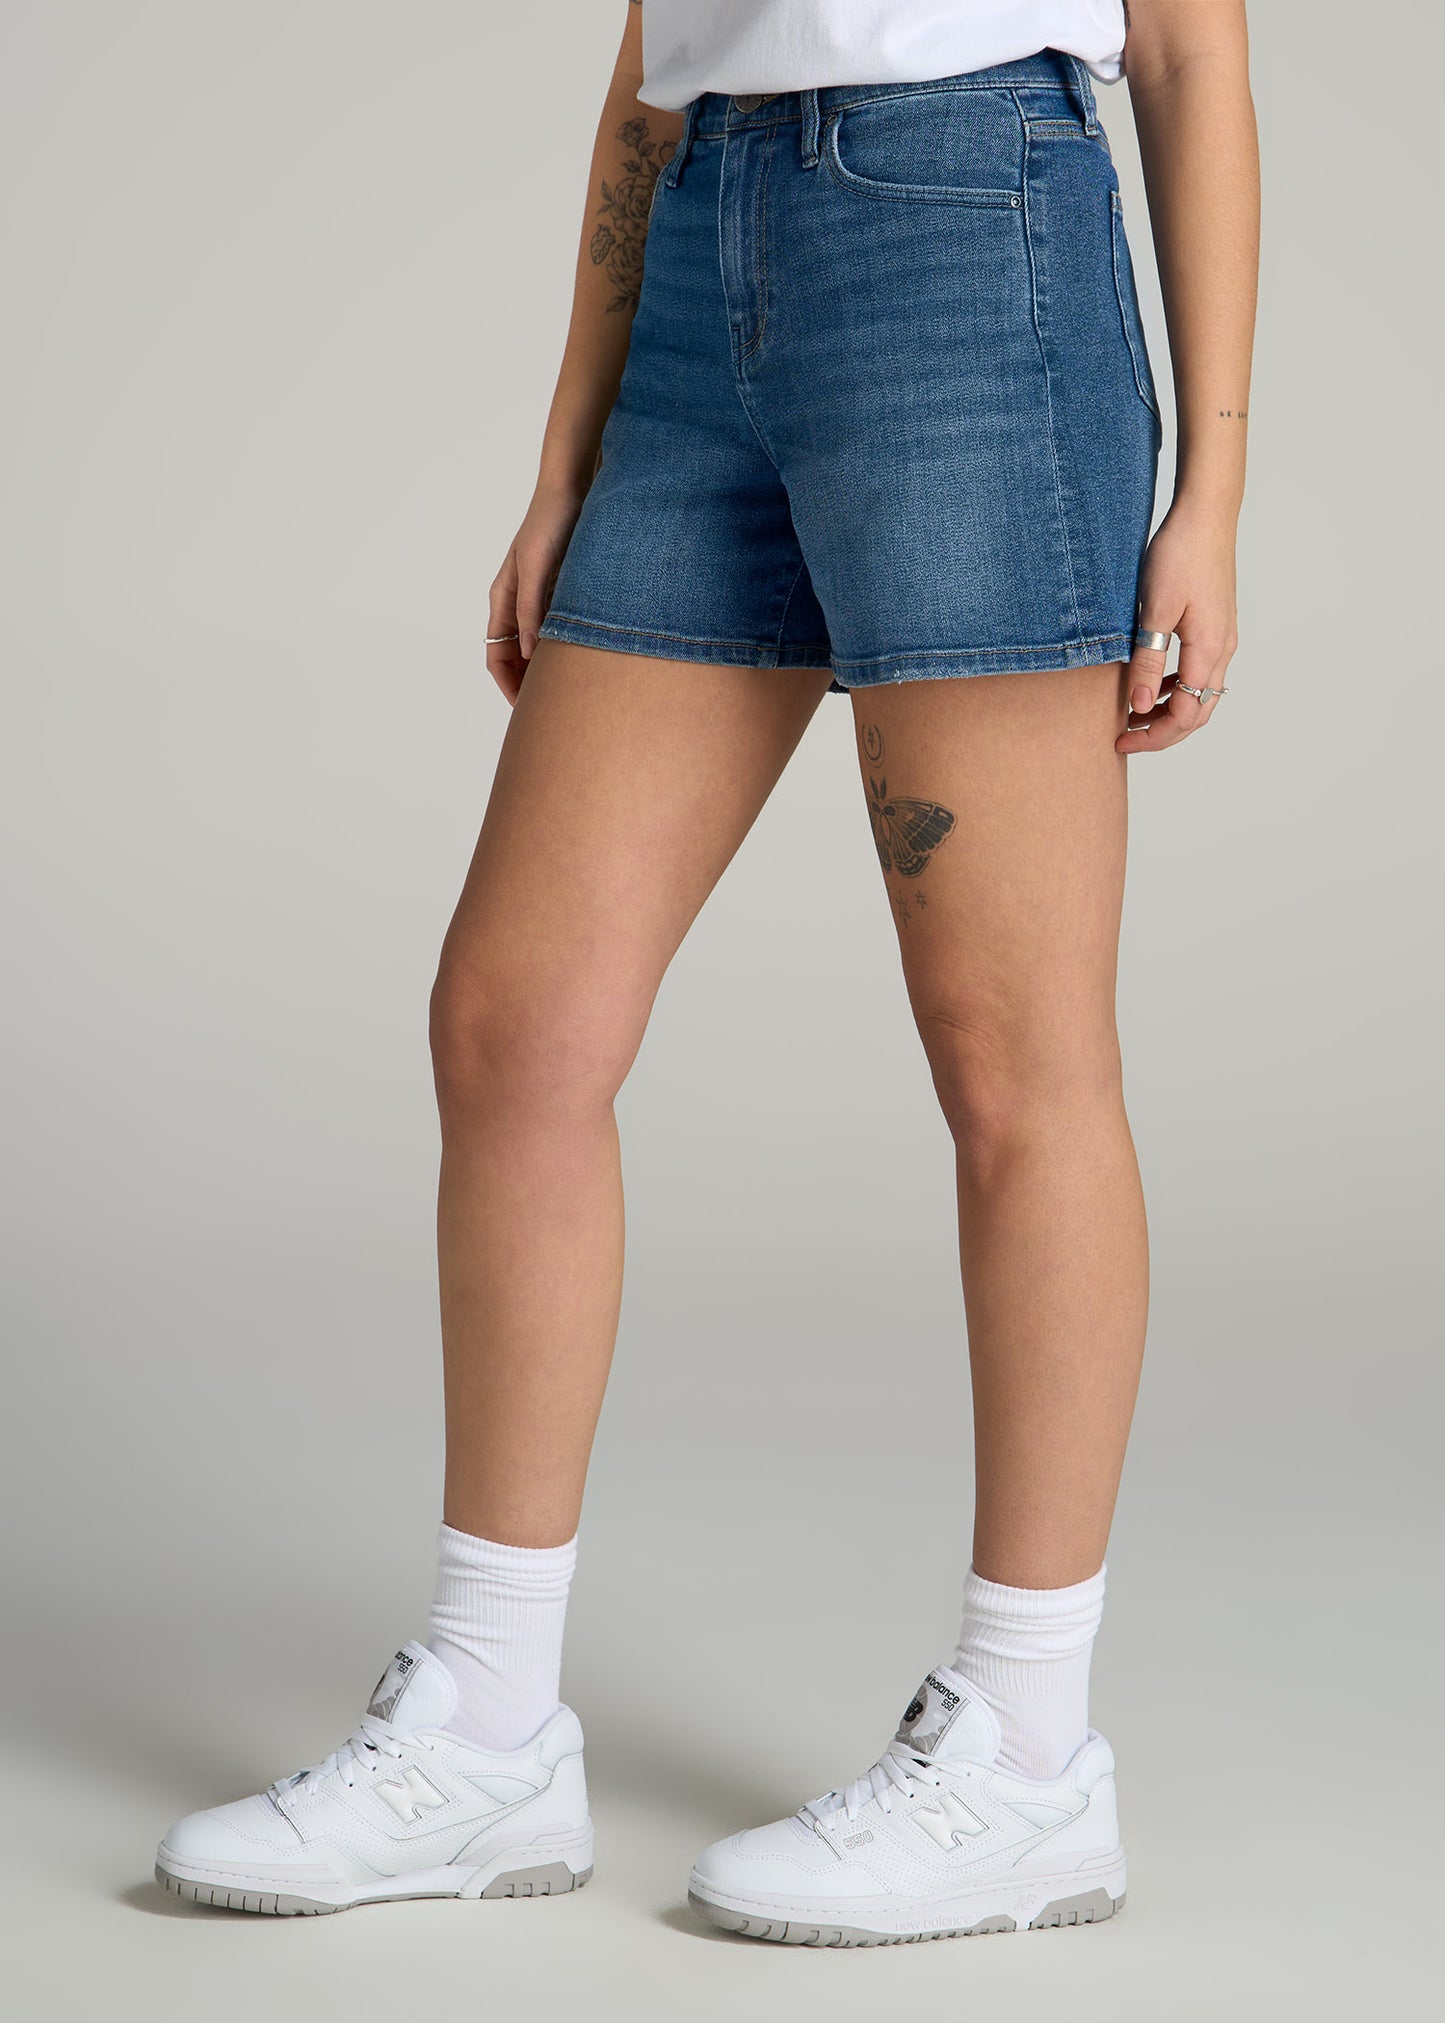 High Rise Denim Shorts for Tall Women in Classic Mid Blue